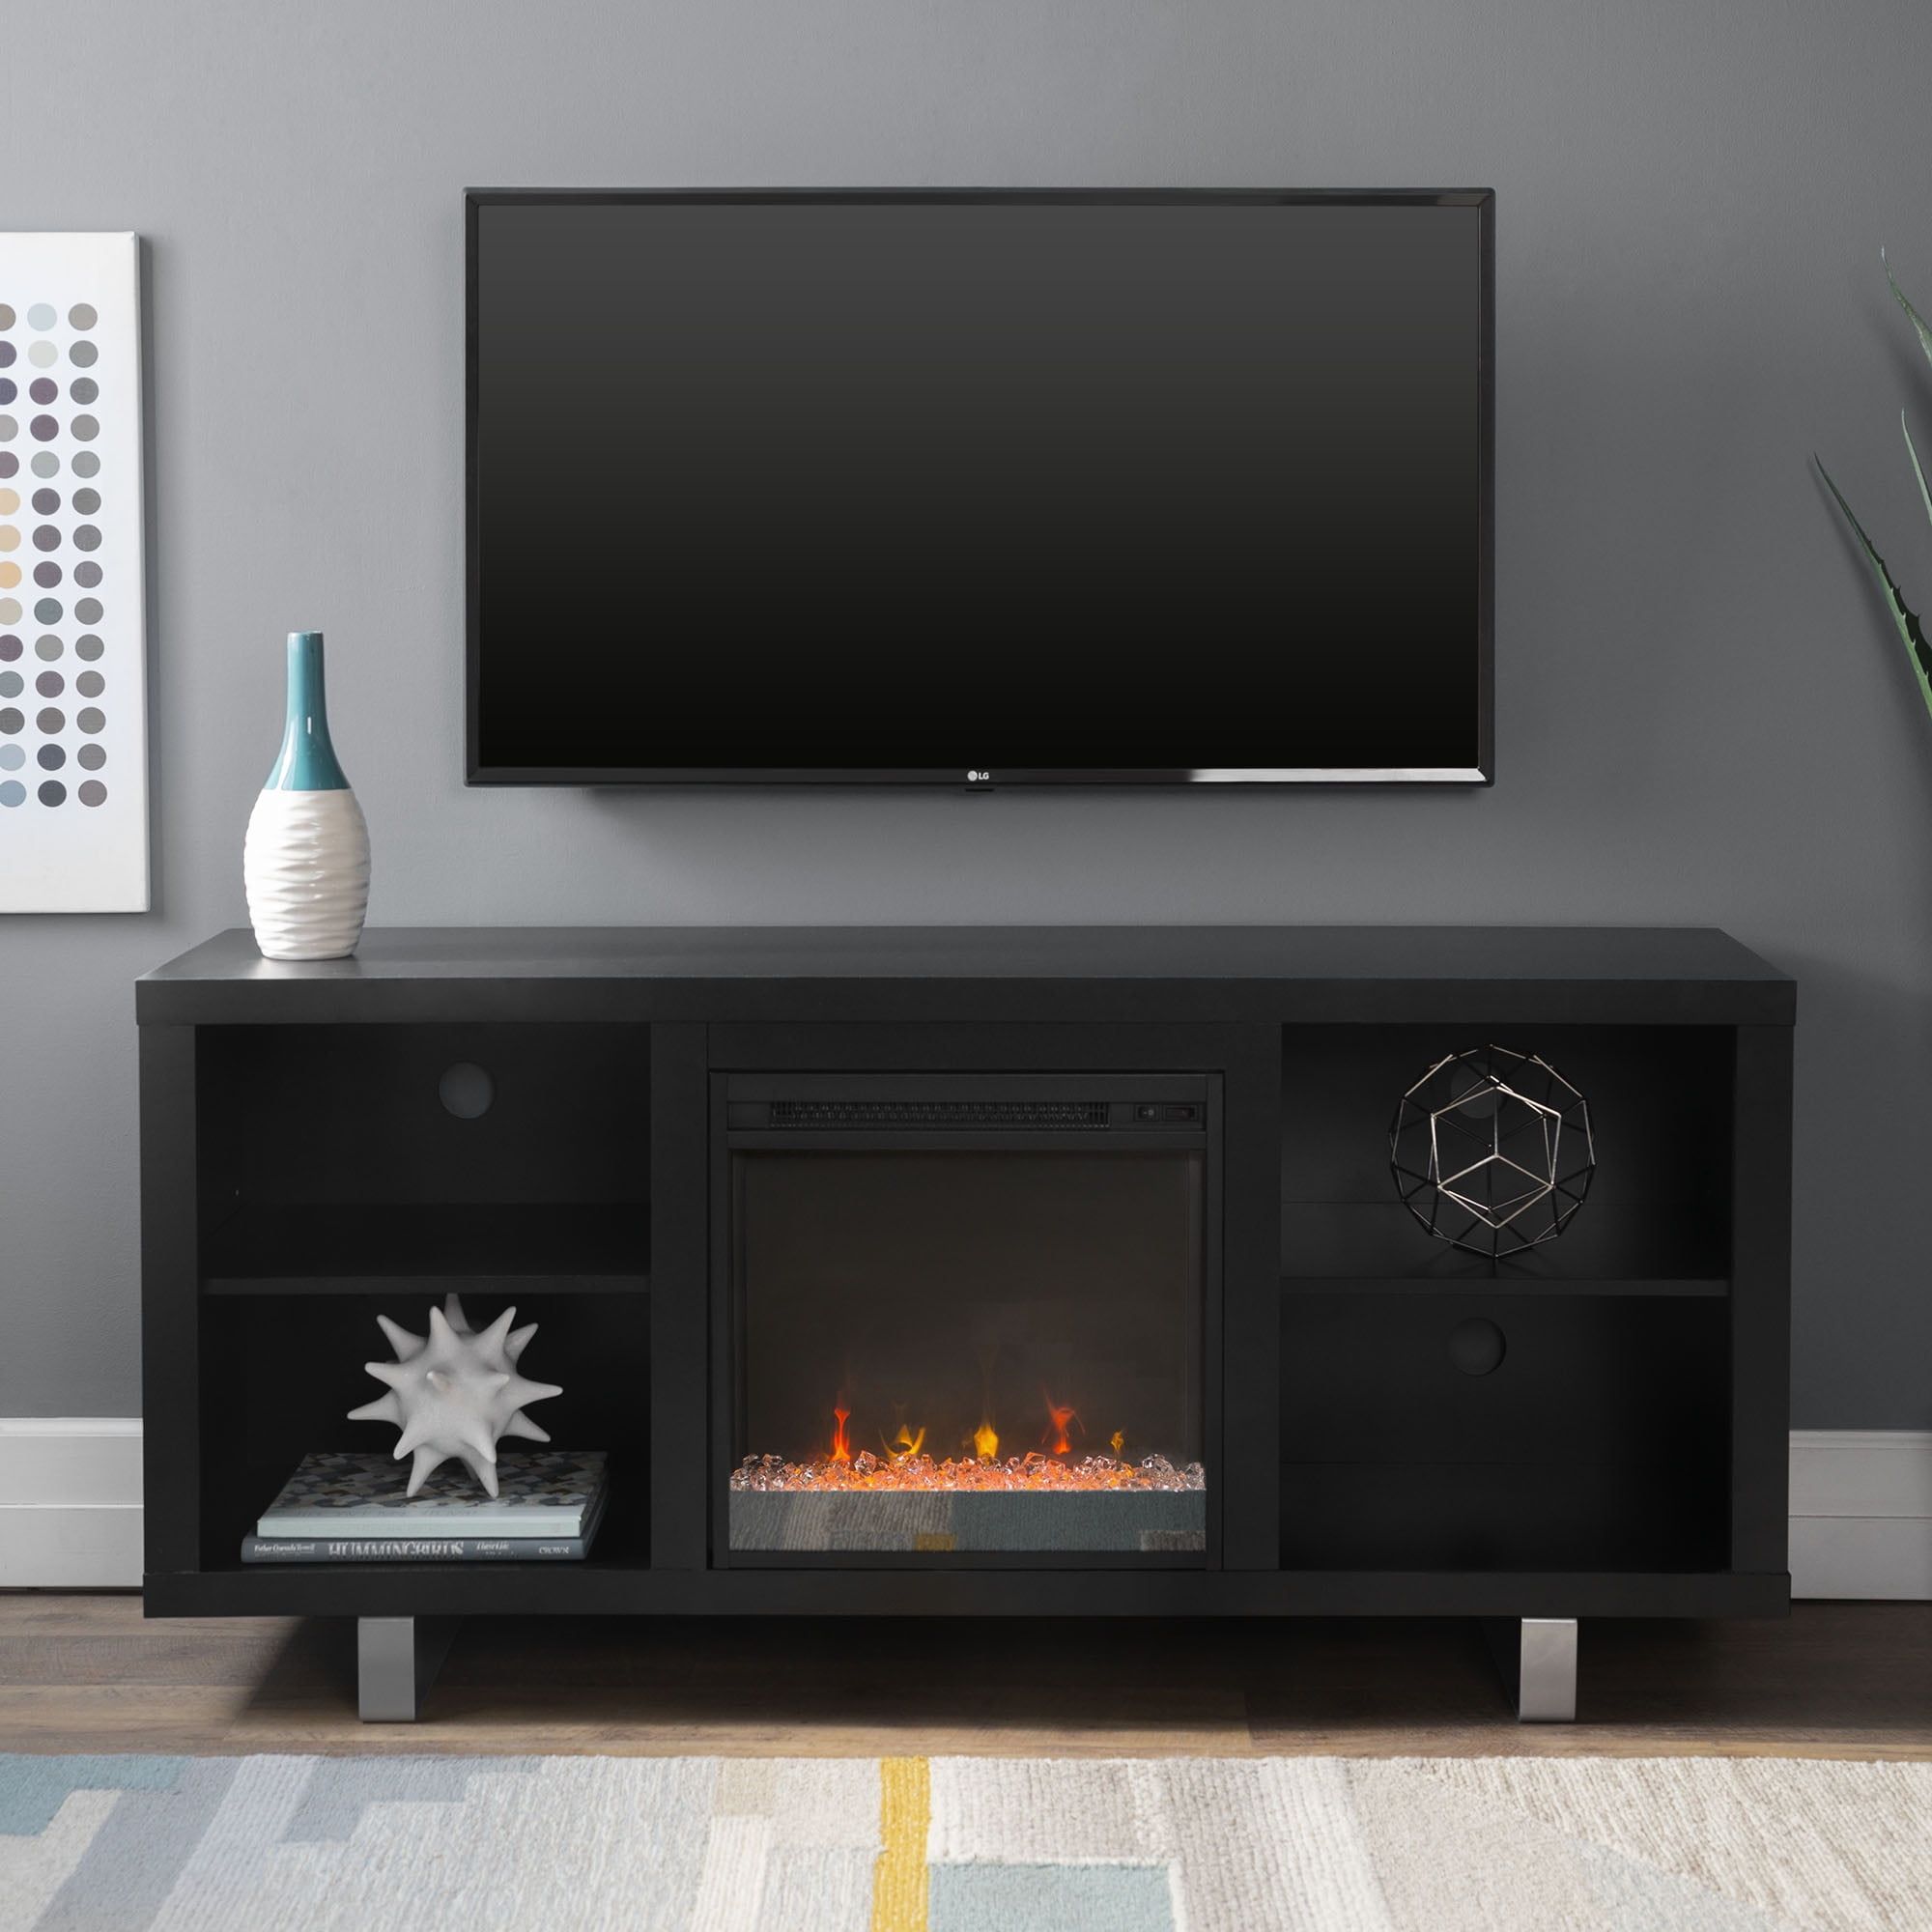 Manor Park Modern Fireplace Tv Stand For Tvs Up To 64?, Black For Modern Fireplace Tv Stands (View 18 of 20)